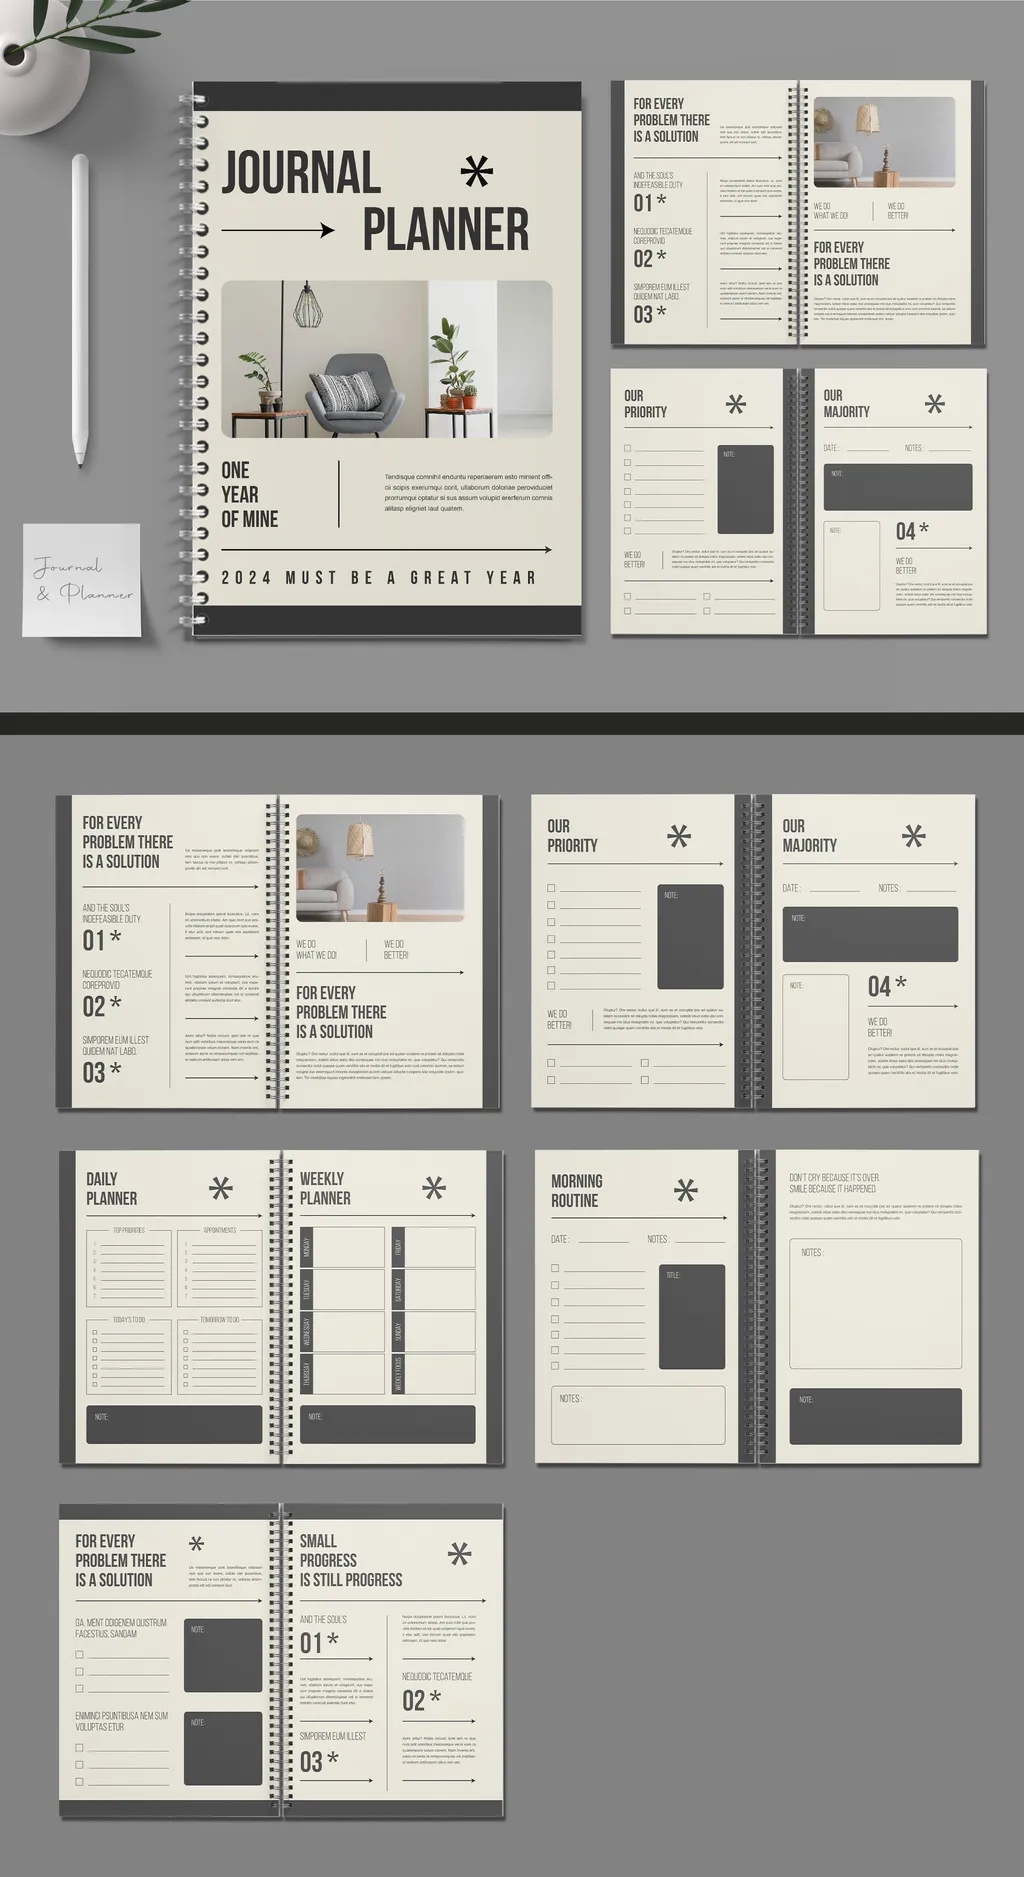 Adobestock - Journal And Planner Template 728990327